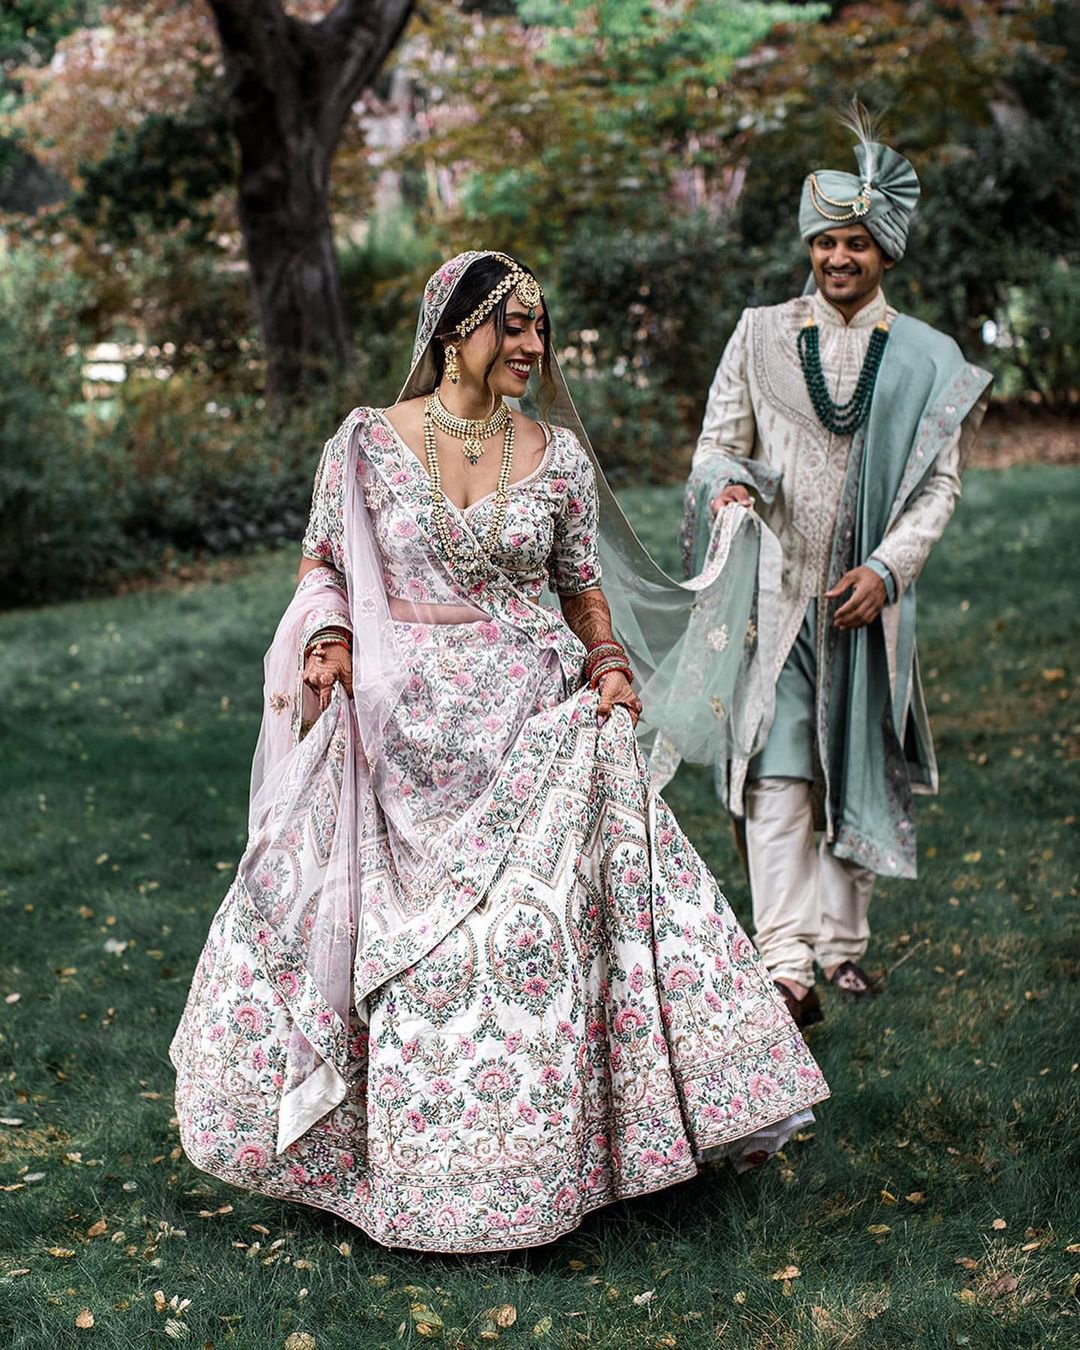 indian style wedding skirt and top,indian wedding clothes,wedding indian gown dress,indian wedding party wear dresses,simple indian bridesmaid dresses,modern white indian wedding dresses,